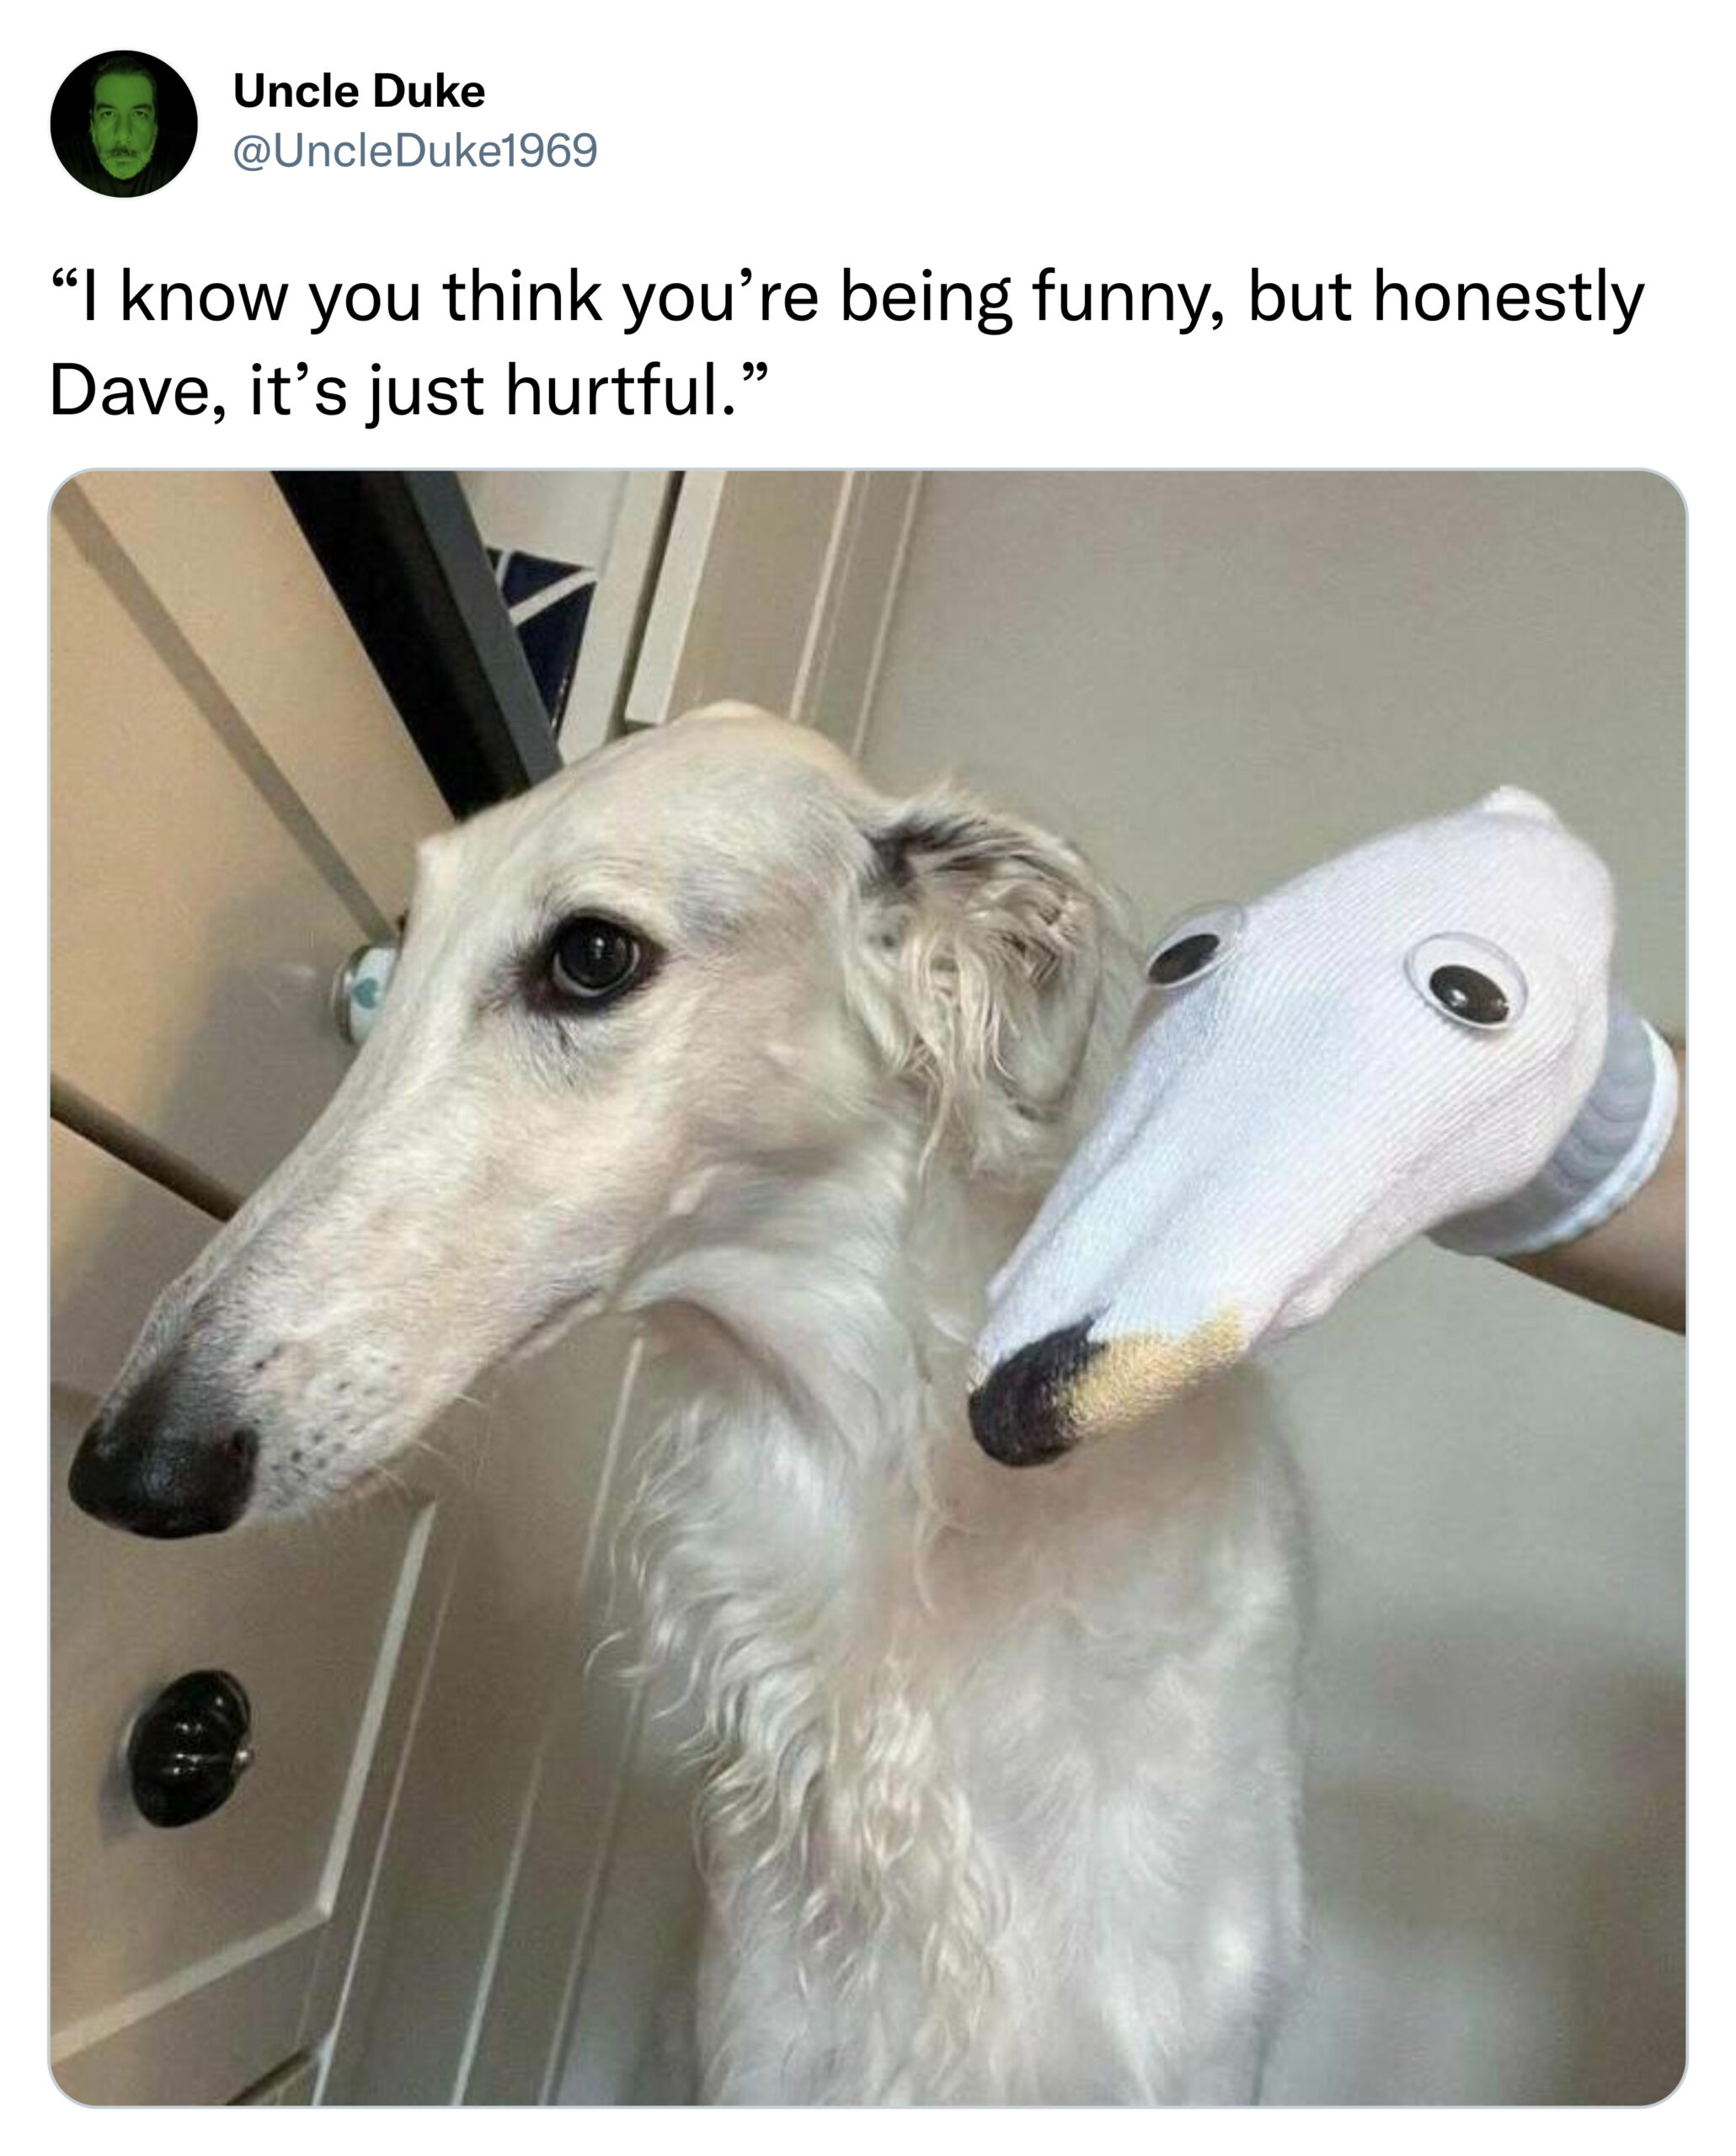 funniest tweets of the week - borzoi - Uncle Duke "I know you think you're being funny, but honestly Dave, it's just hurtful."